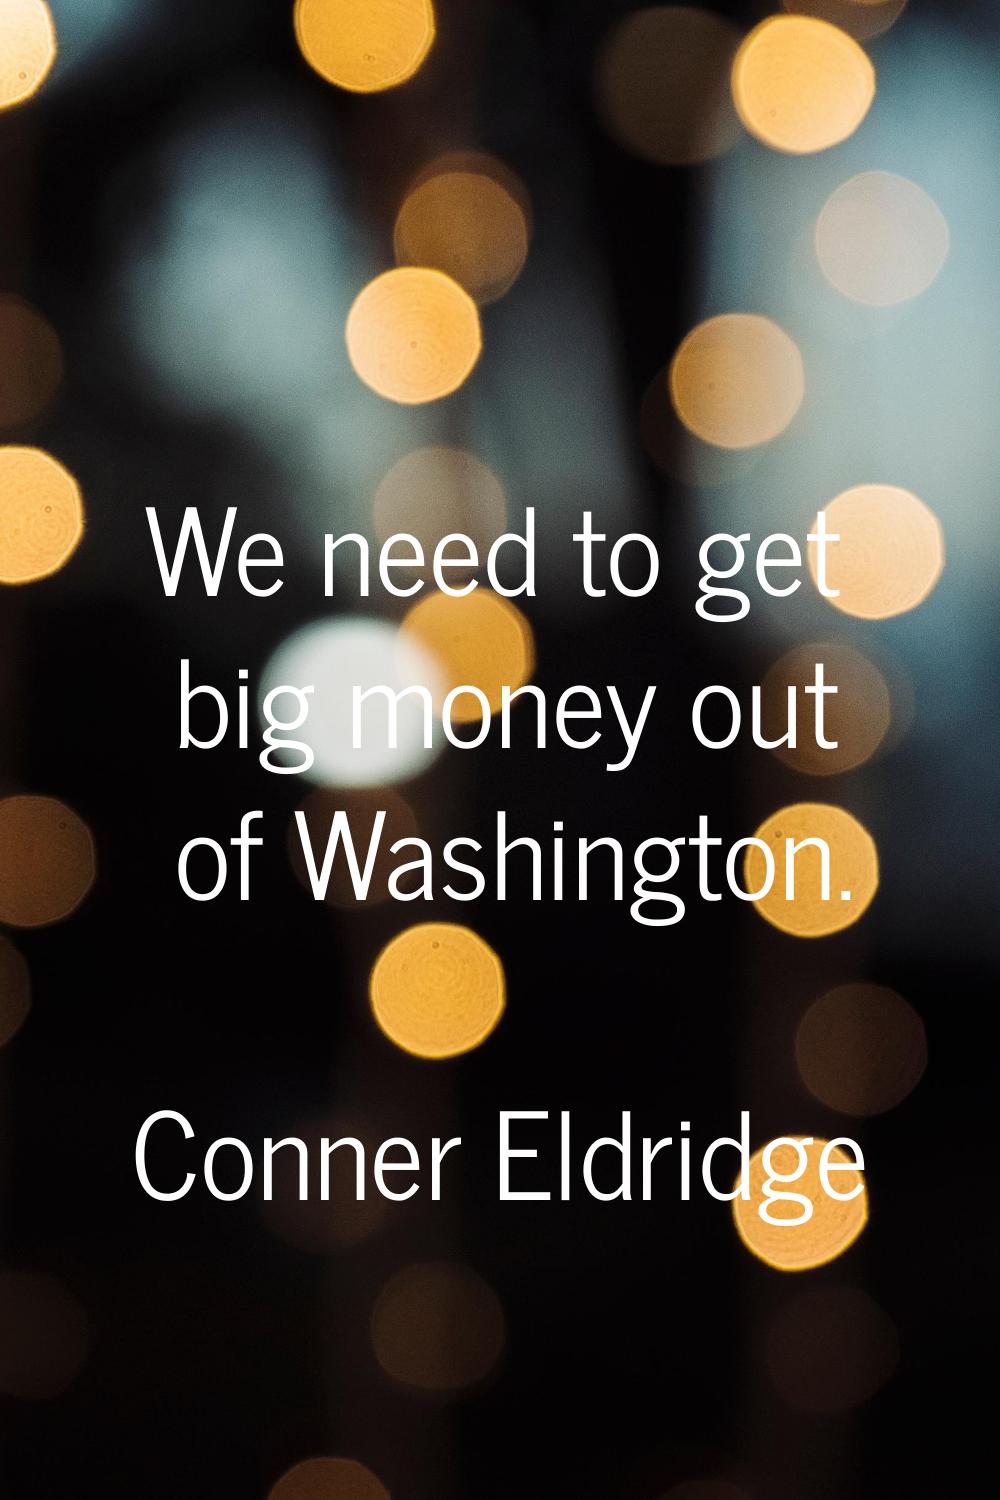 We need to get big money out of Washington.